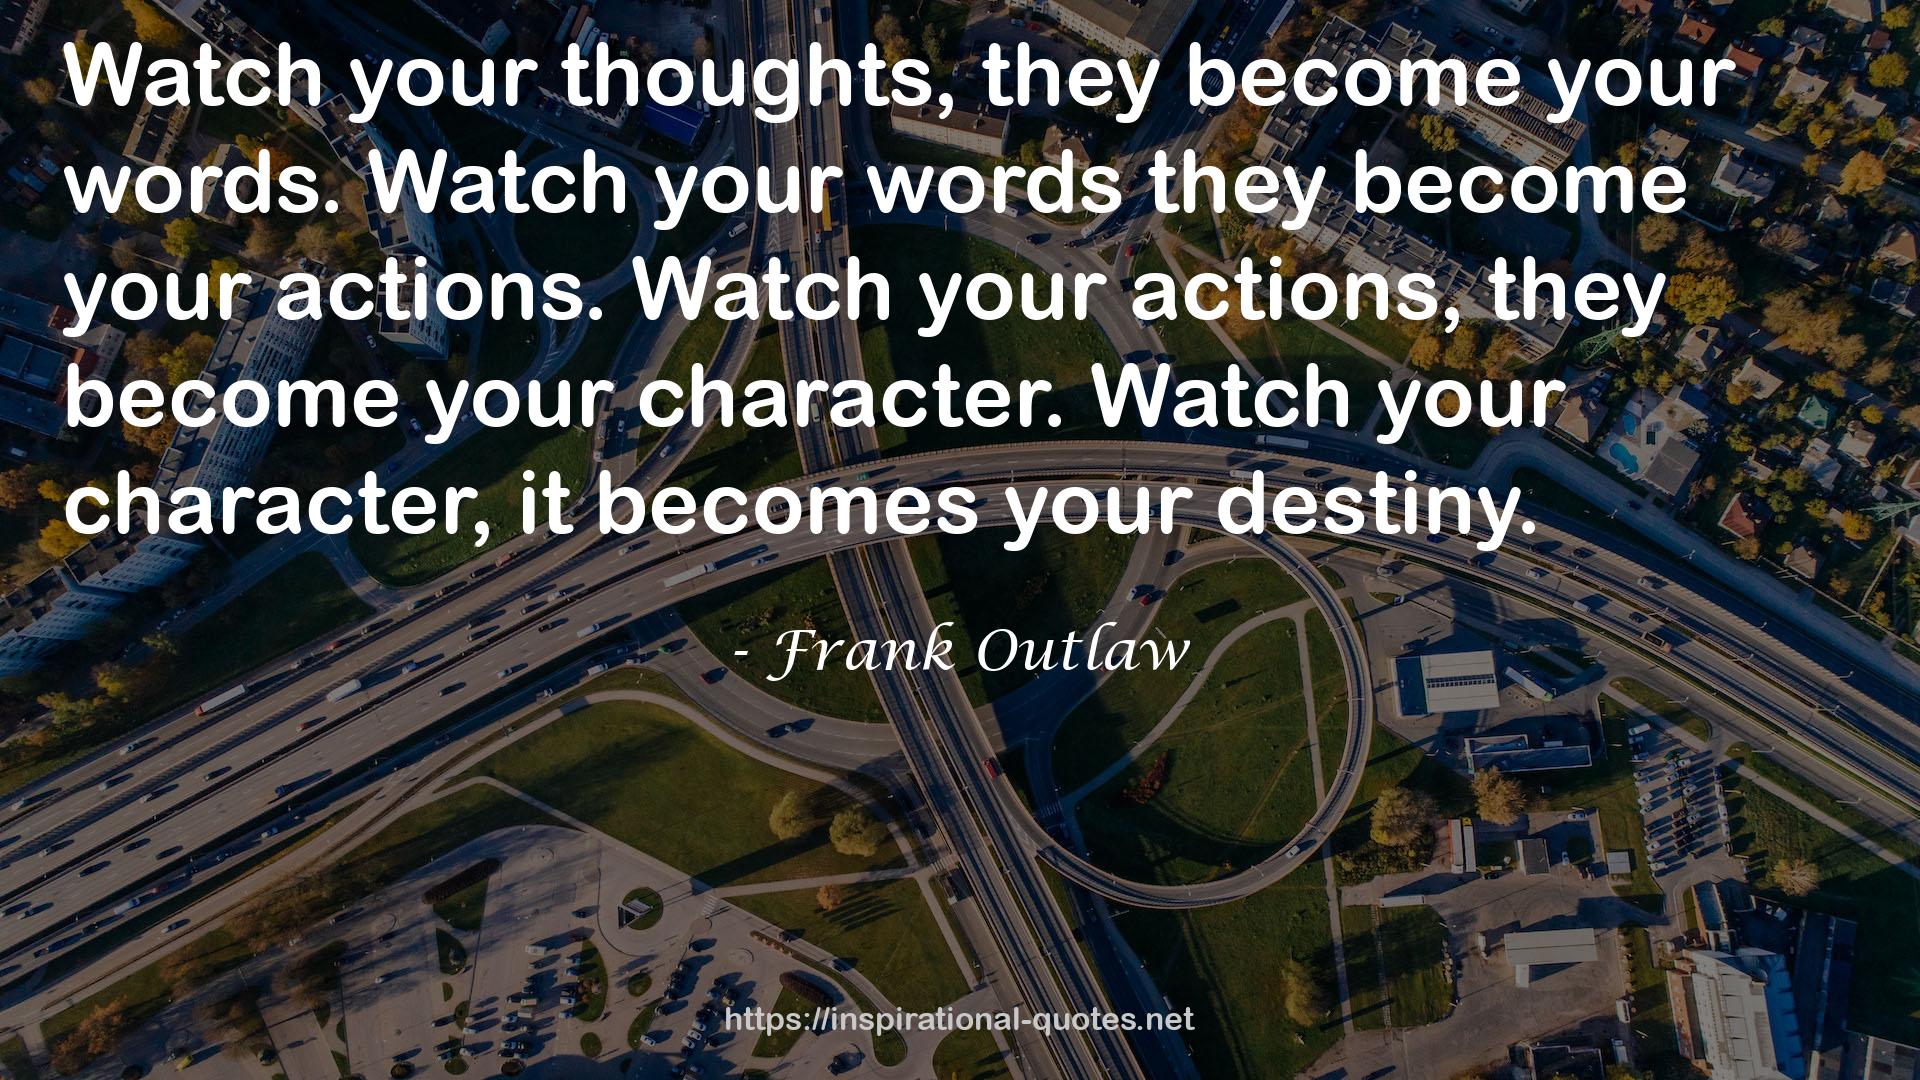 Frank Outlaw QUOTES